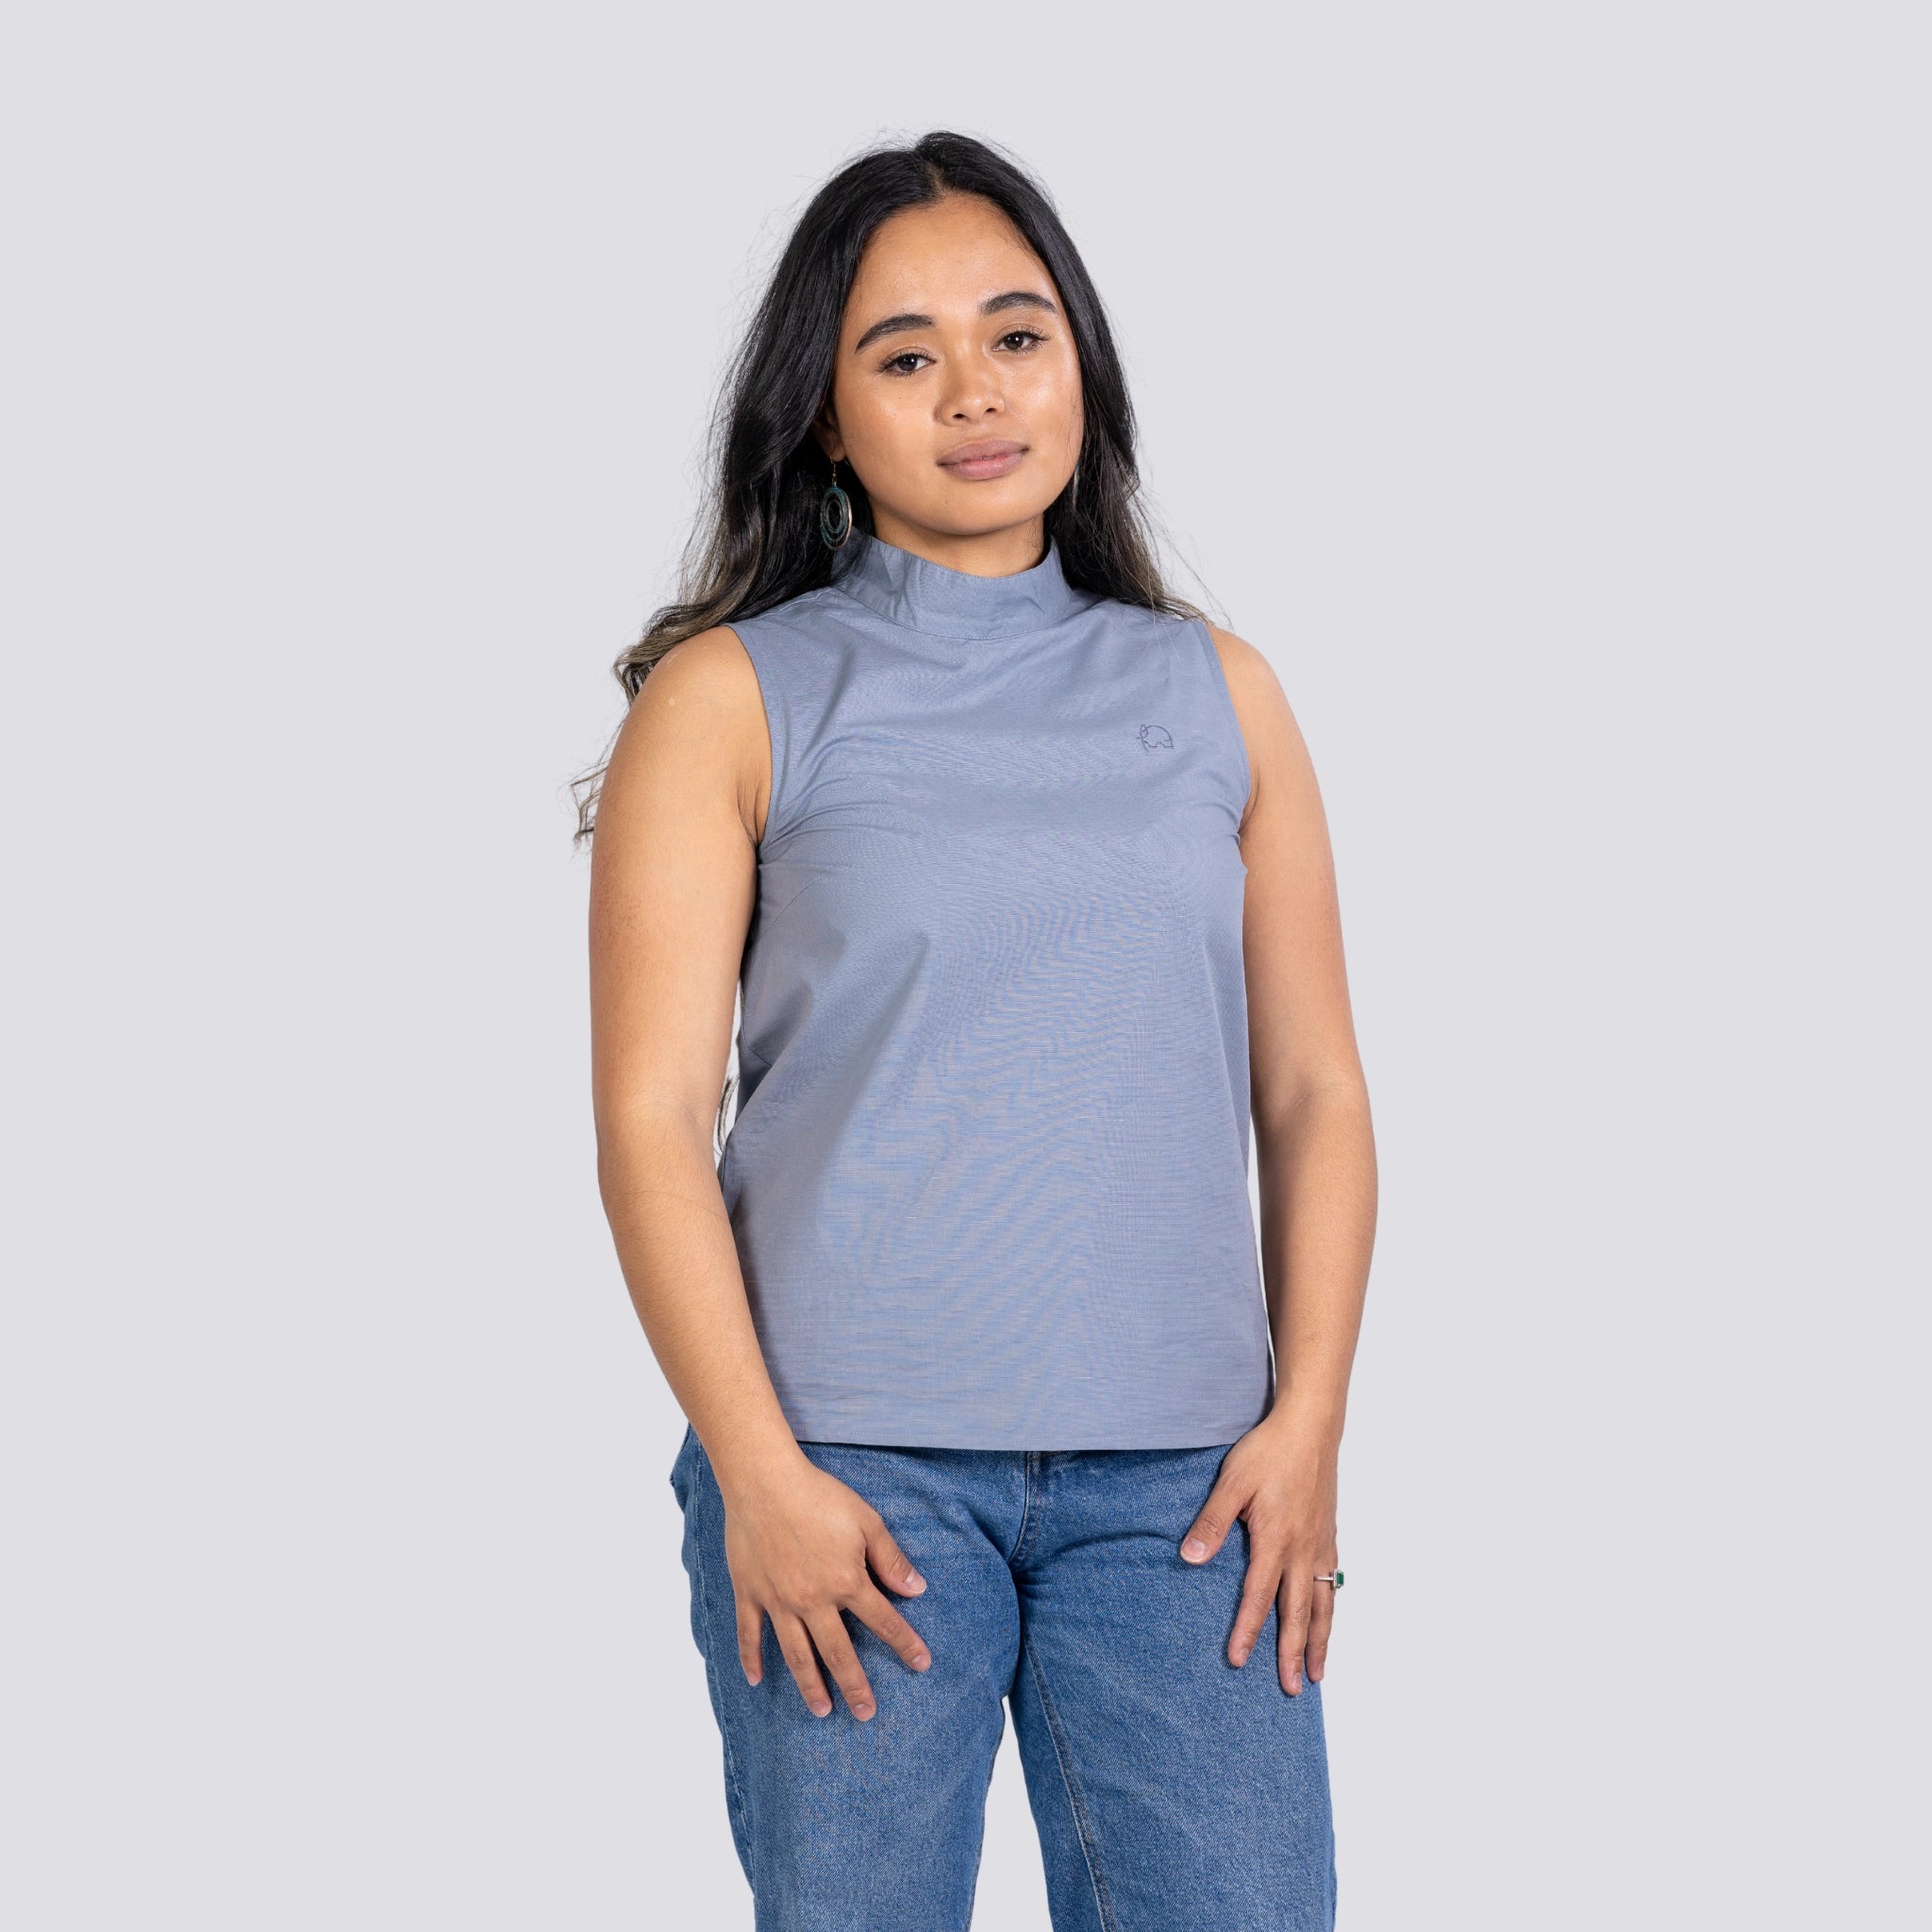 A young woman in a sustainable fashion Karee Linen Sleeveless Top in Classic Grey and blue jeans standing against a light gray background.